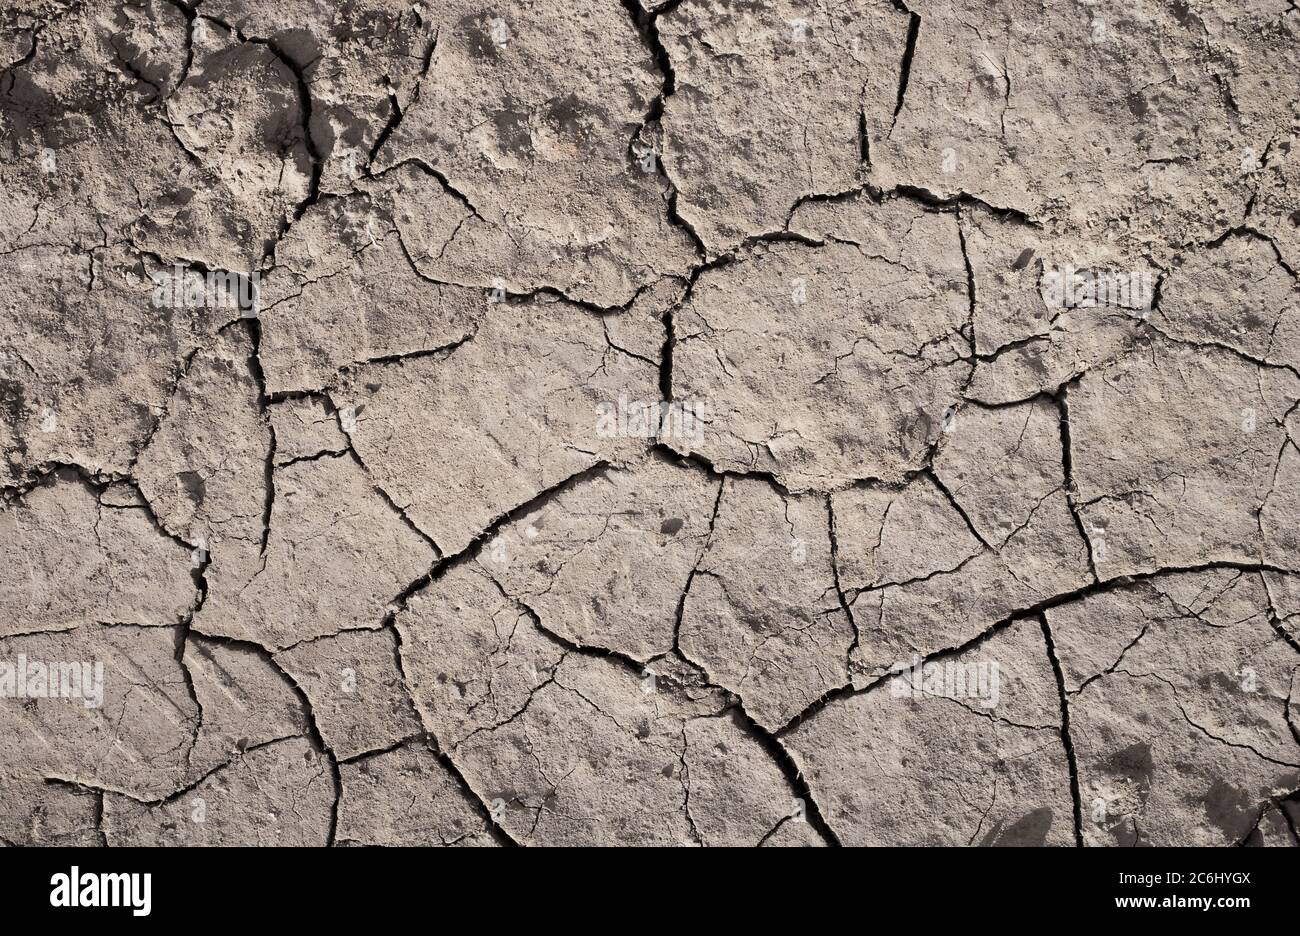 Dryness of dry land. Environmental problem of aridity and drought leading to negative desertification. Soil is cracked and scorched Stock Photo